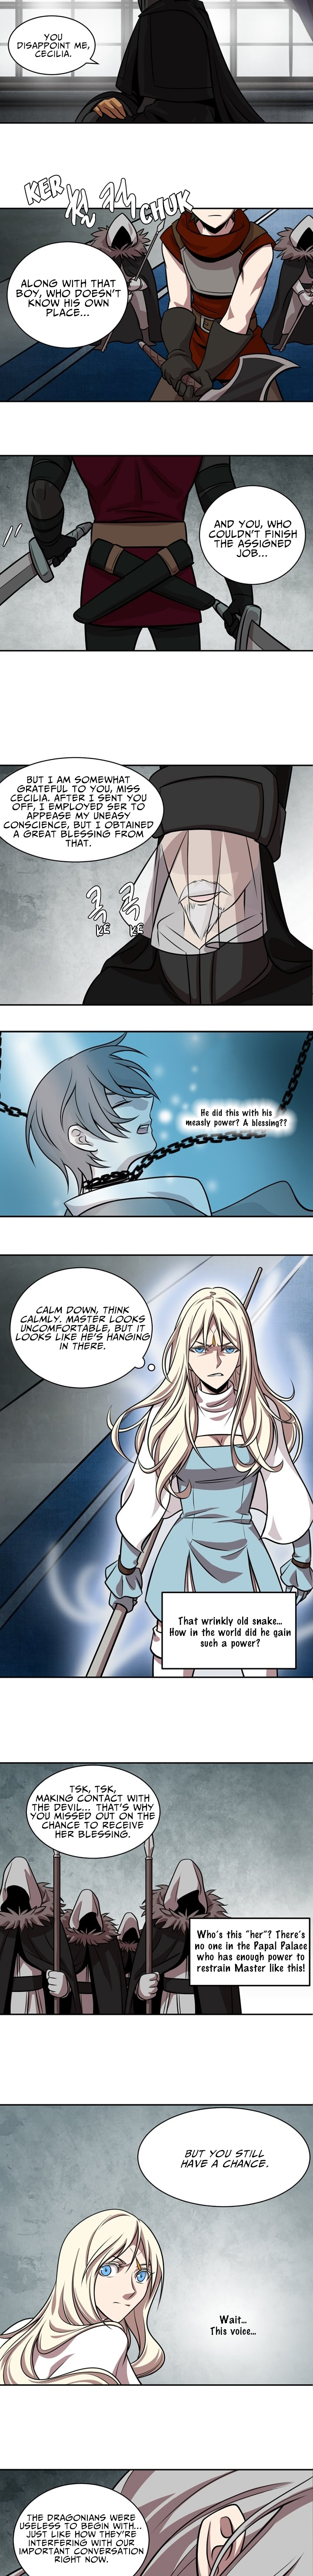 Sword and Magic Ch. 21